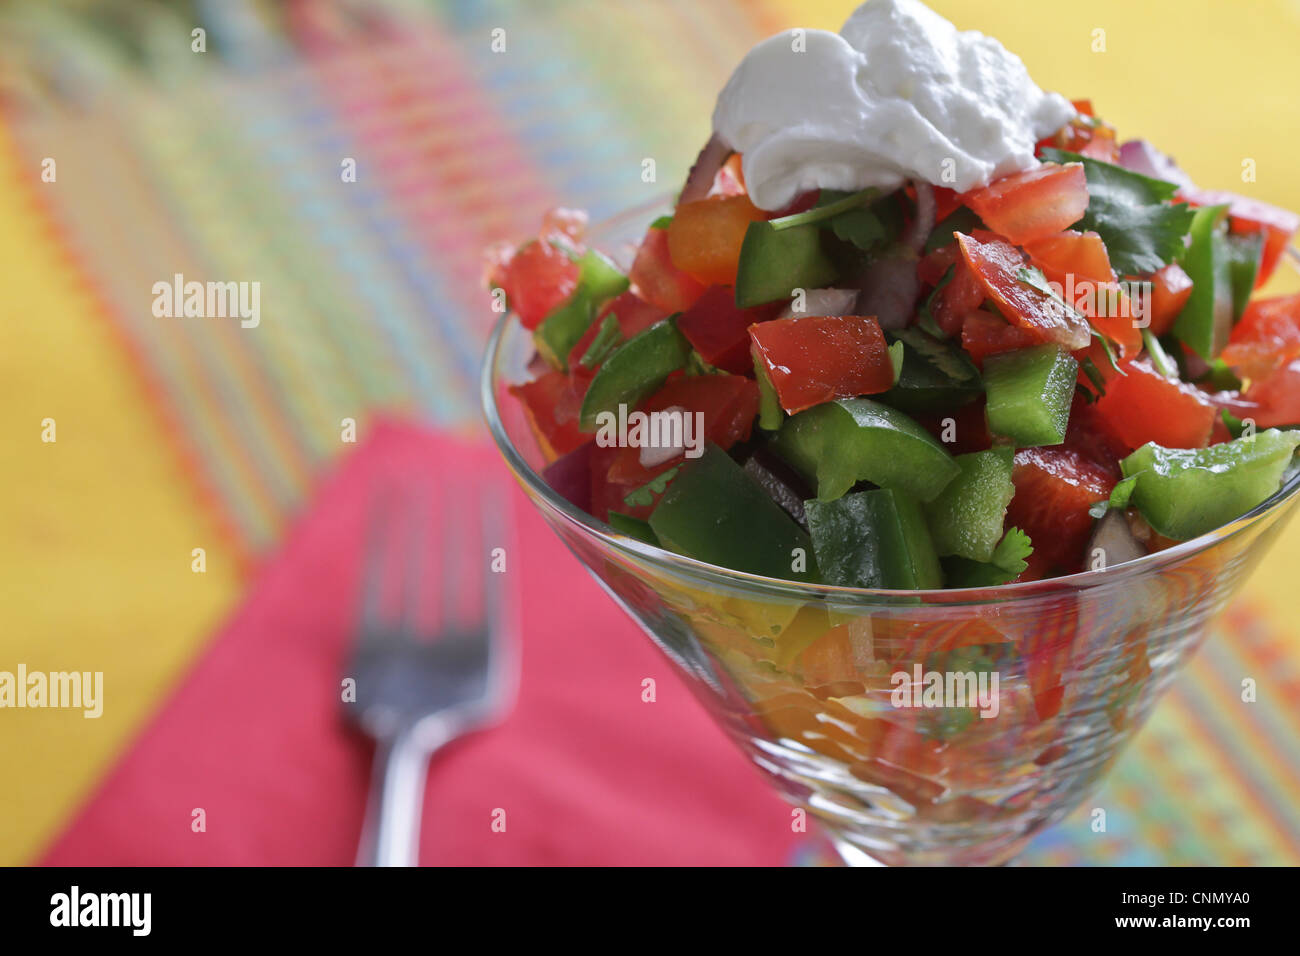 A vegetable salad in a clear glass with a dollop of sour cream, with a fork and napkin on a colorful placemat. Stock Photo